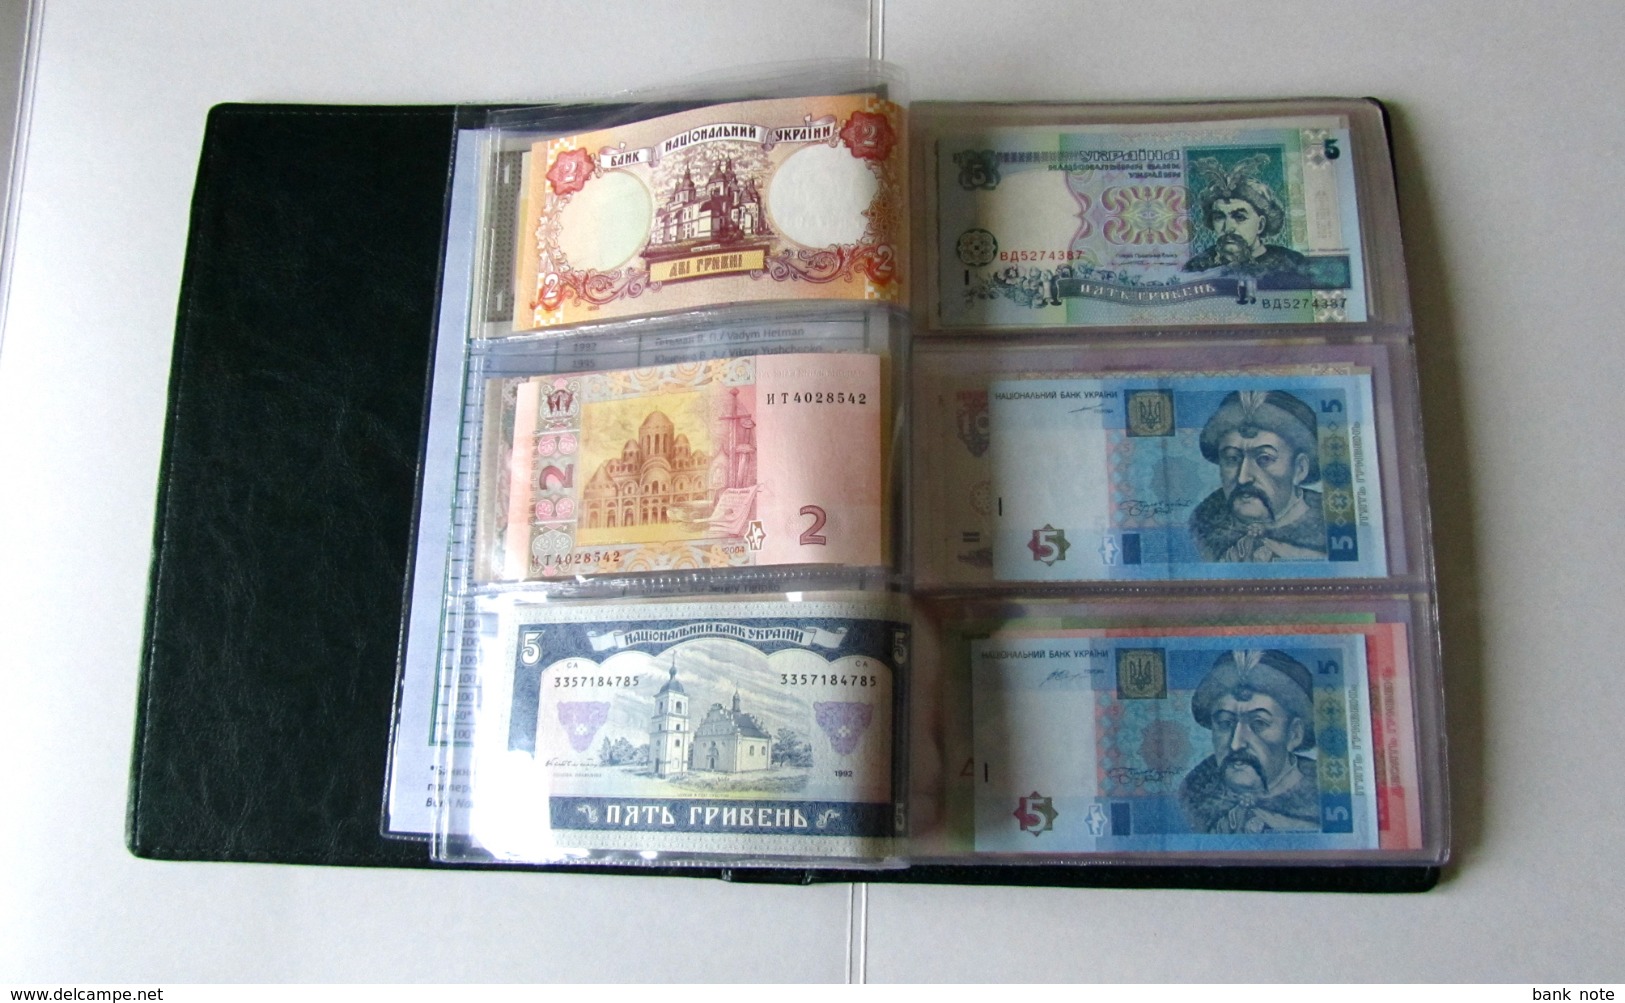 UKRAINE NATIONAL BANK SET 28 BANKNOTES IN ALBUM "20 YEARS OF CURRENCY REFORM" Unc